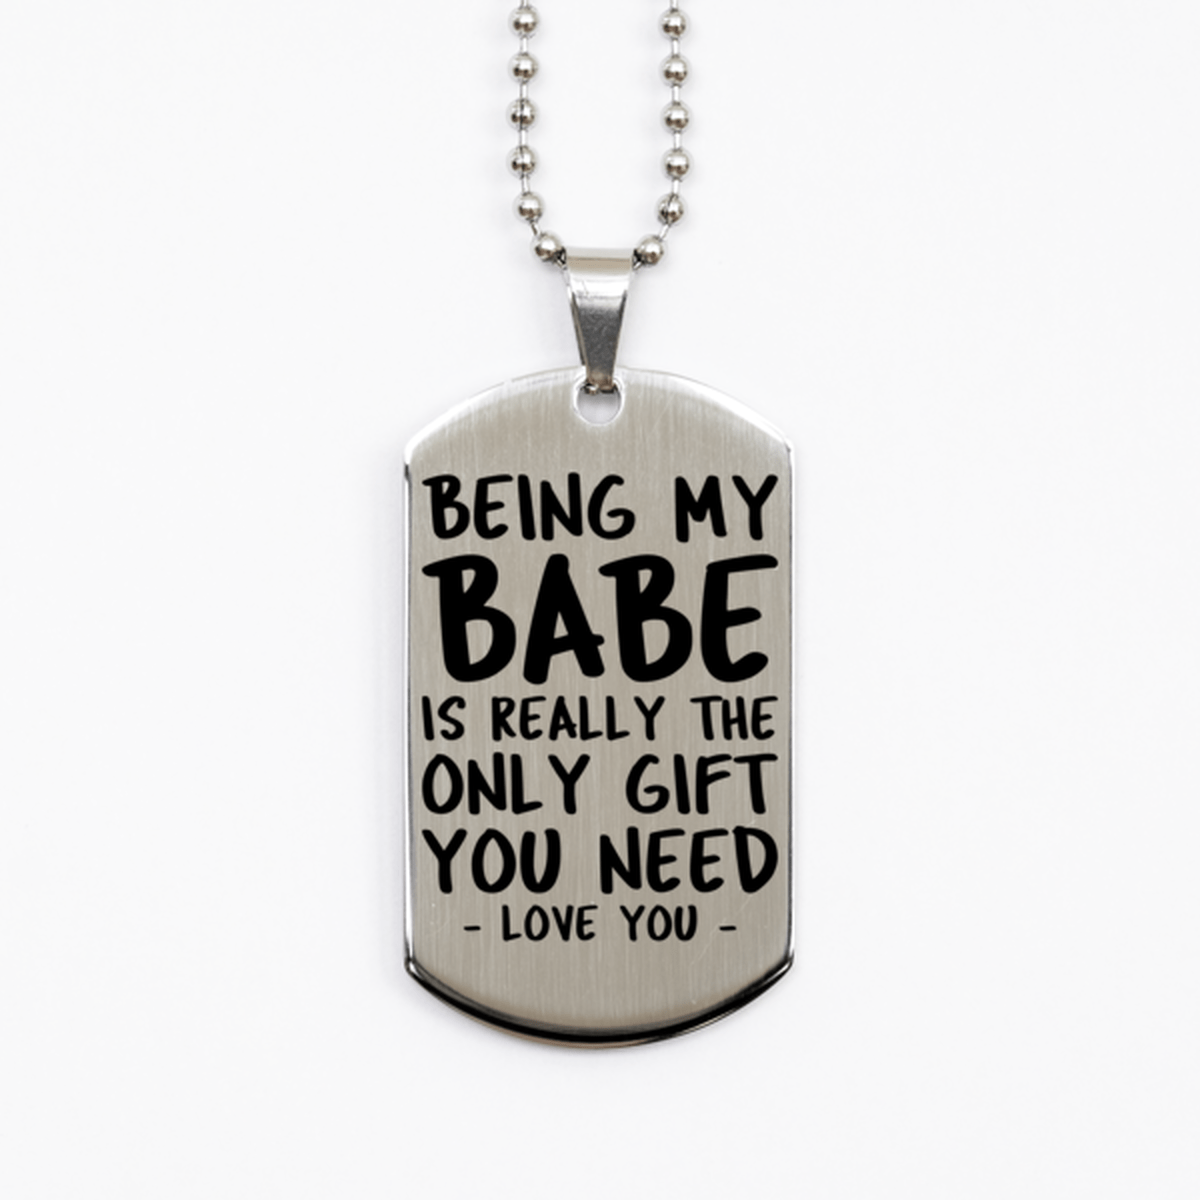 Funny Babe Silver Dog Tag Necklace, Being My Babe Is Really the Only Gift You Need, Best Birthday Gifts for Babe